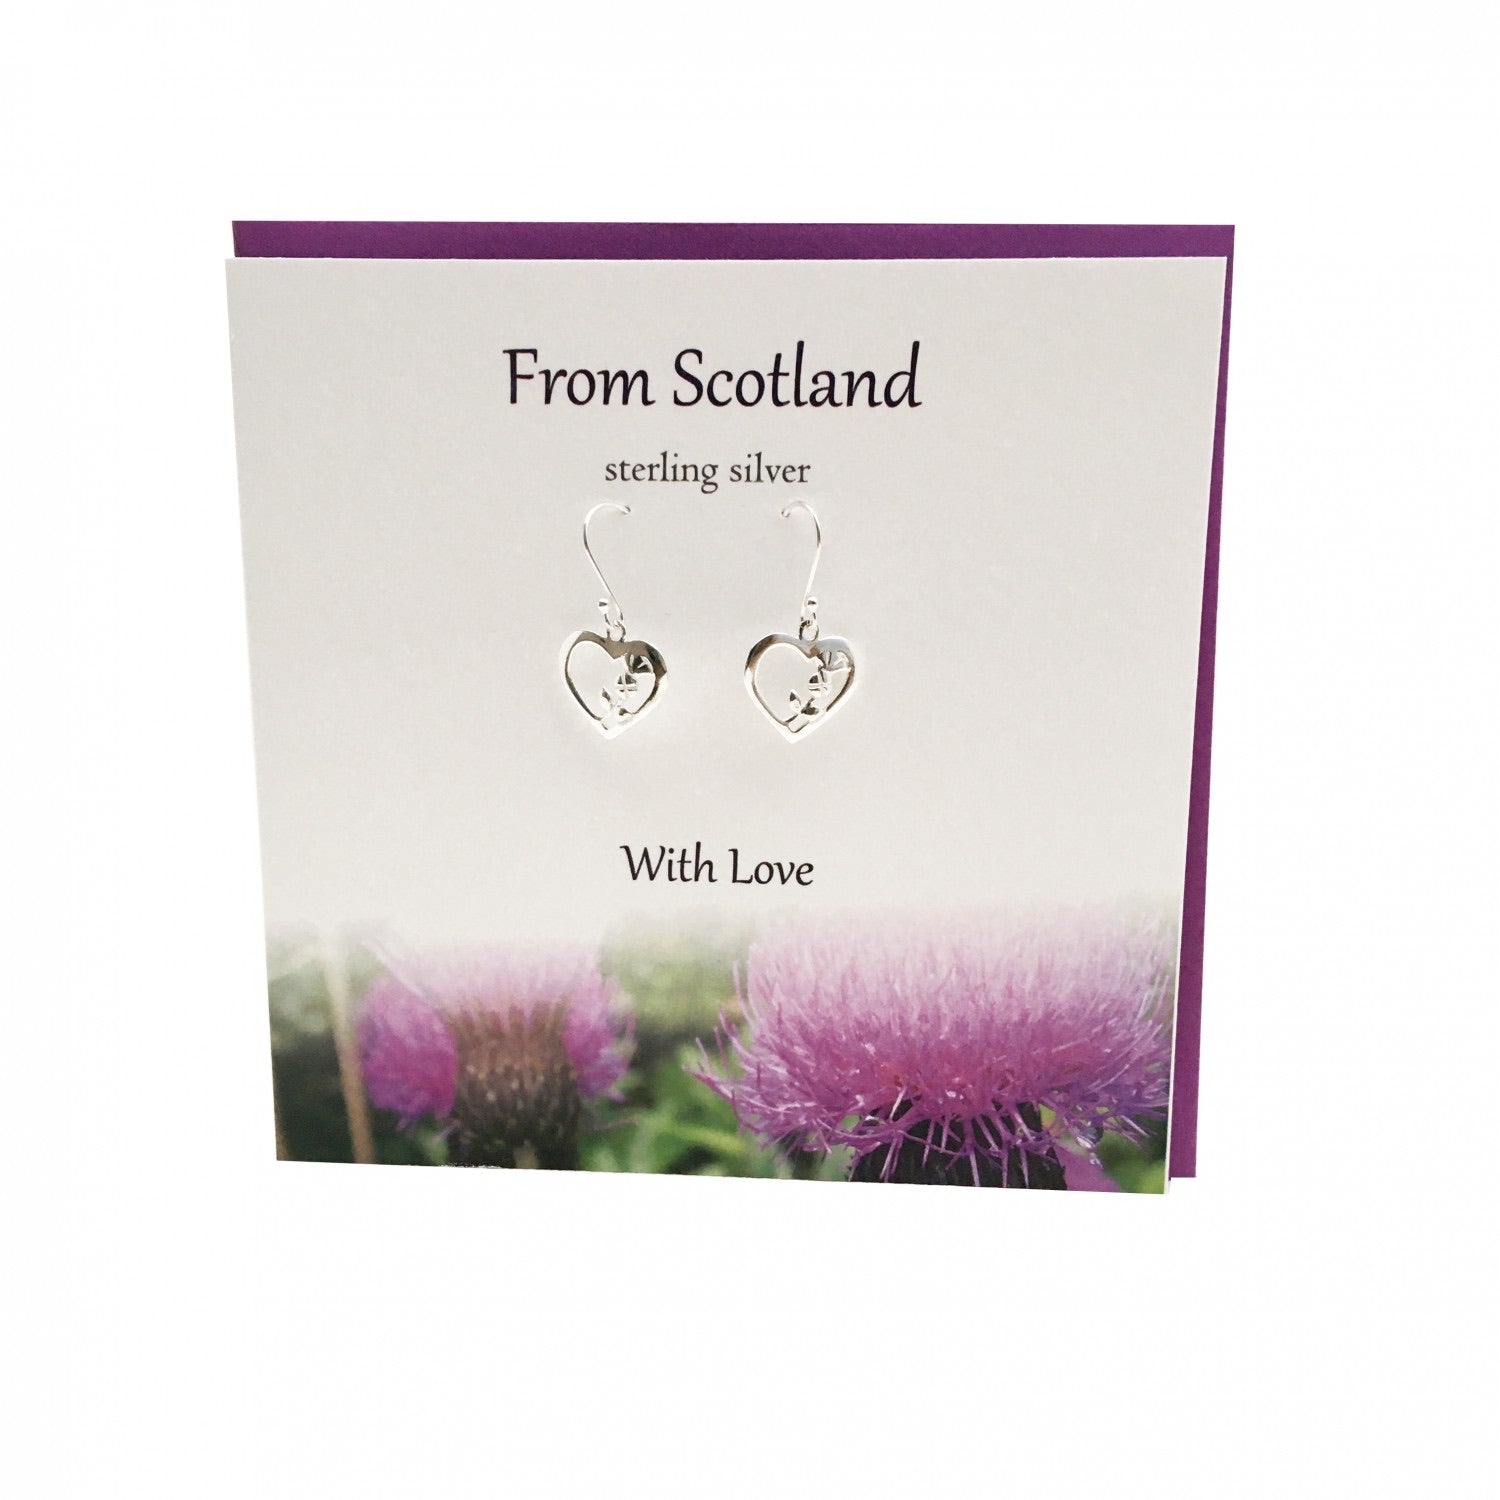 From Scotland with Love Earrings